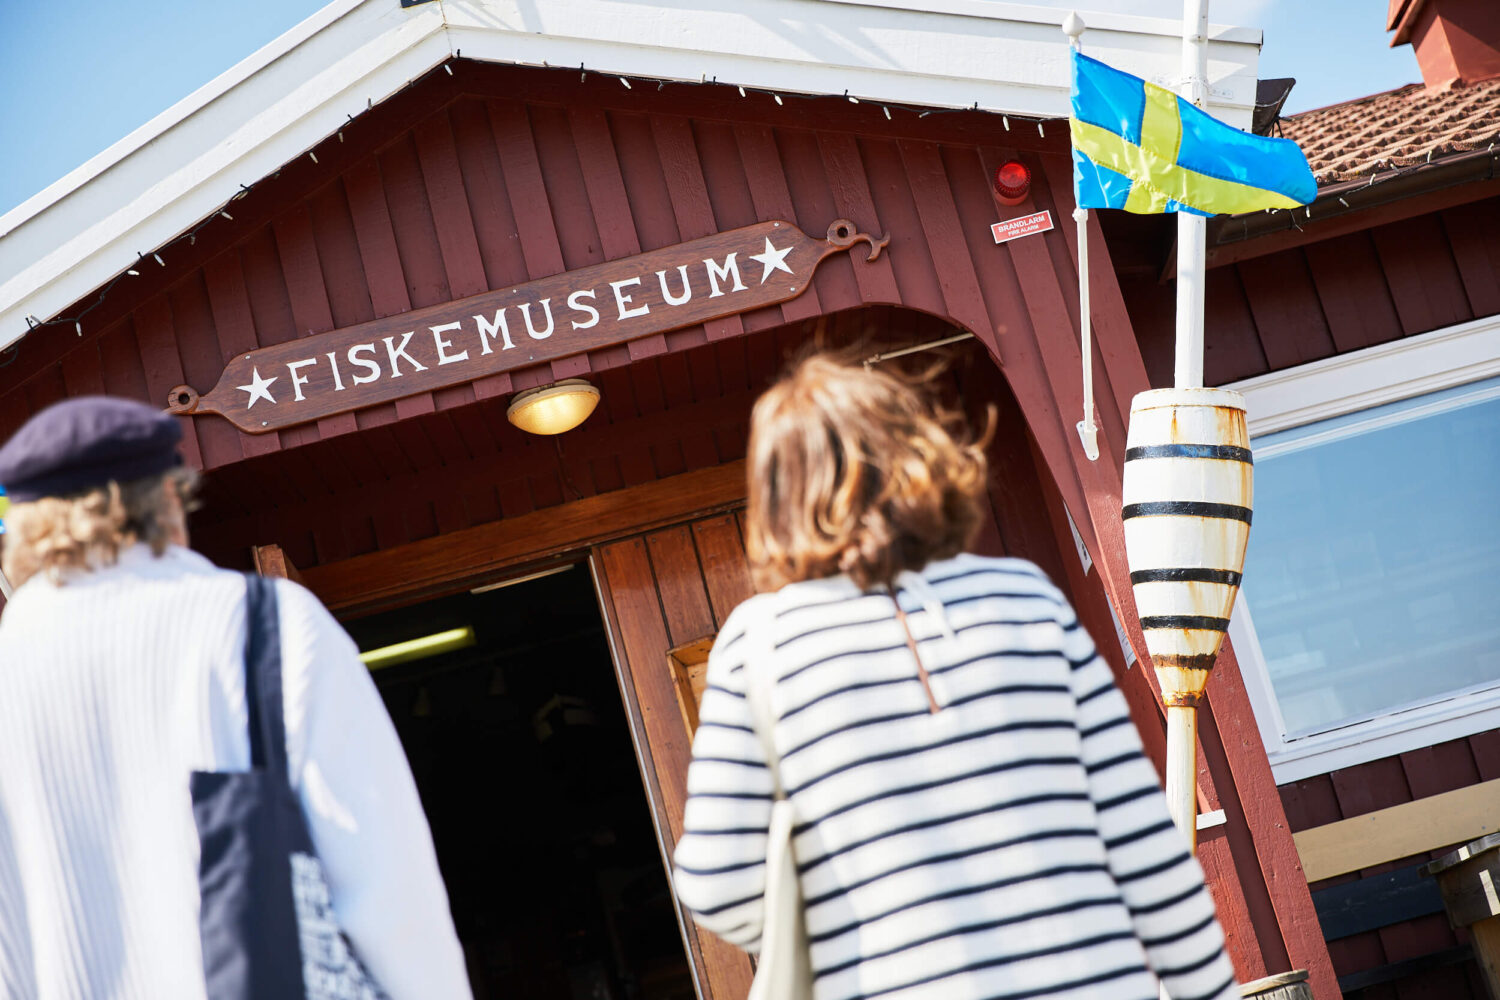 At the Museum, you can see what the boats looked like, where they were built and how the fishing was carried out.